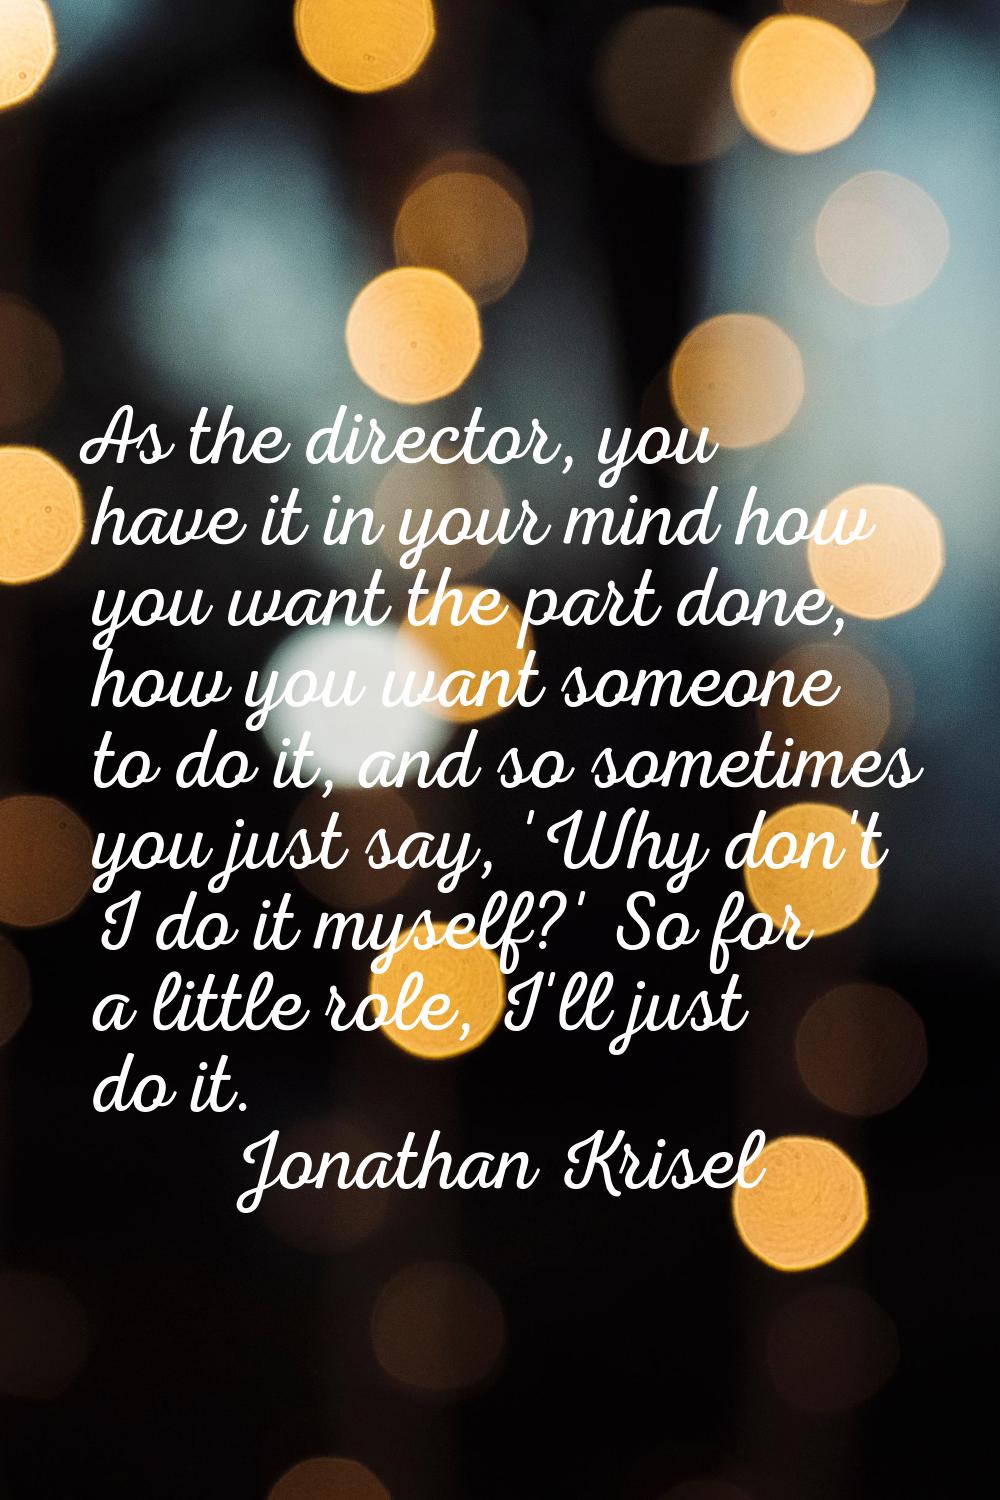 As the director, you have it in your mind how you want the part done, how you want someone to do it